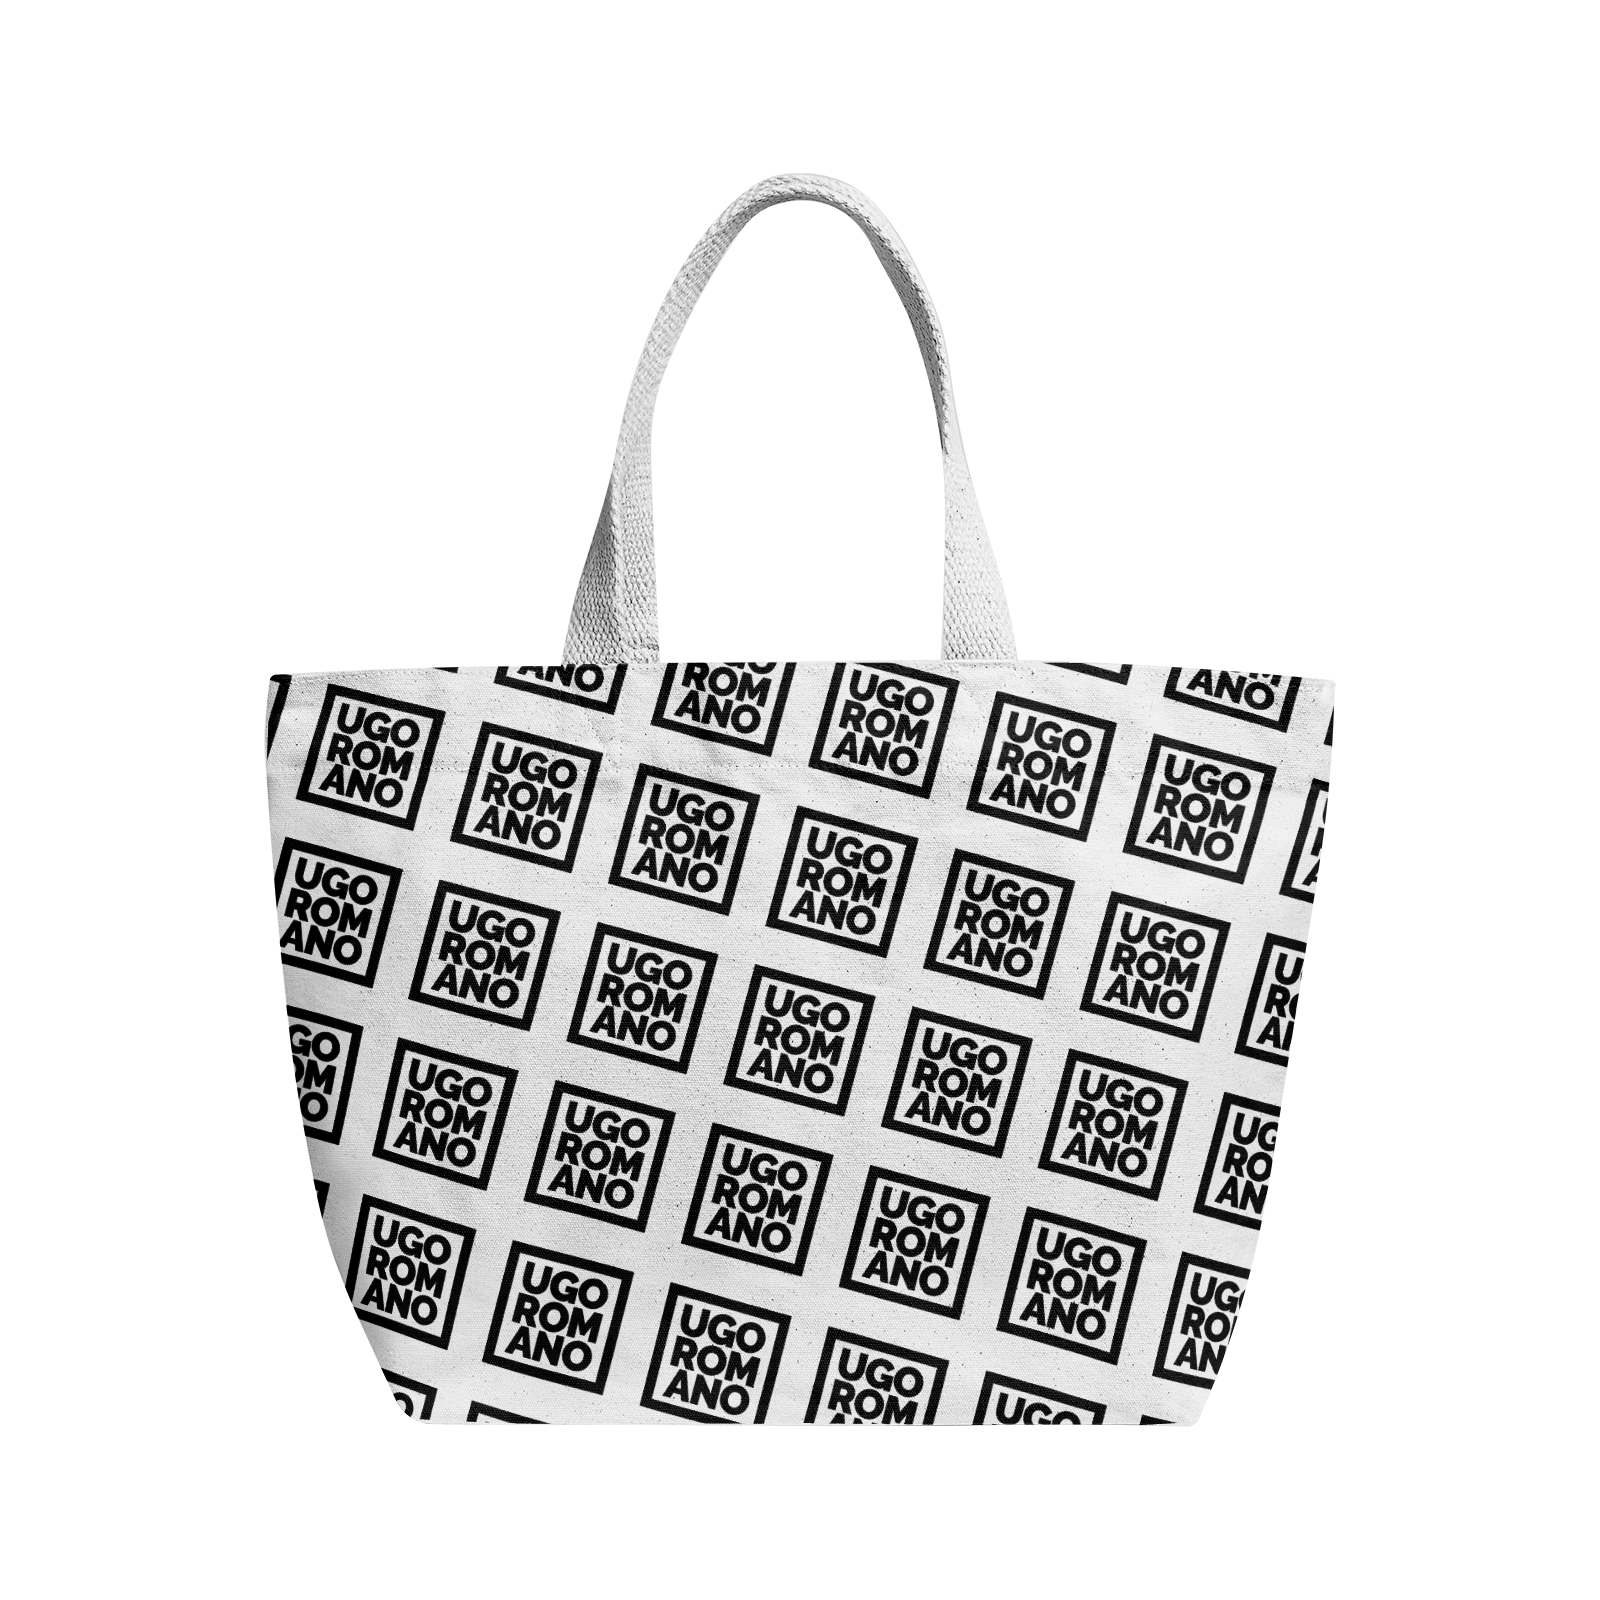 Heavy Duty and Strong Natural Cotton Canvas Tote Bag - UGO ROMANO URTB042